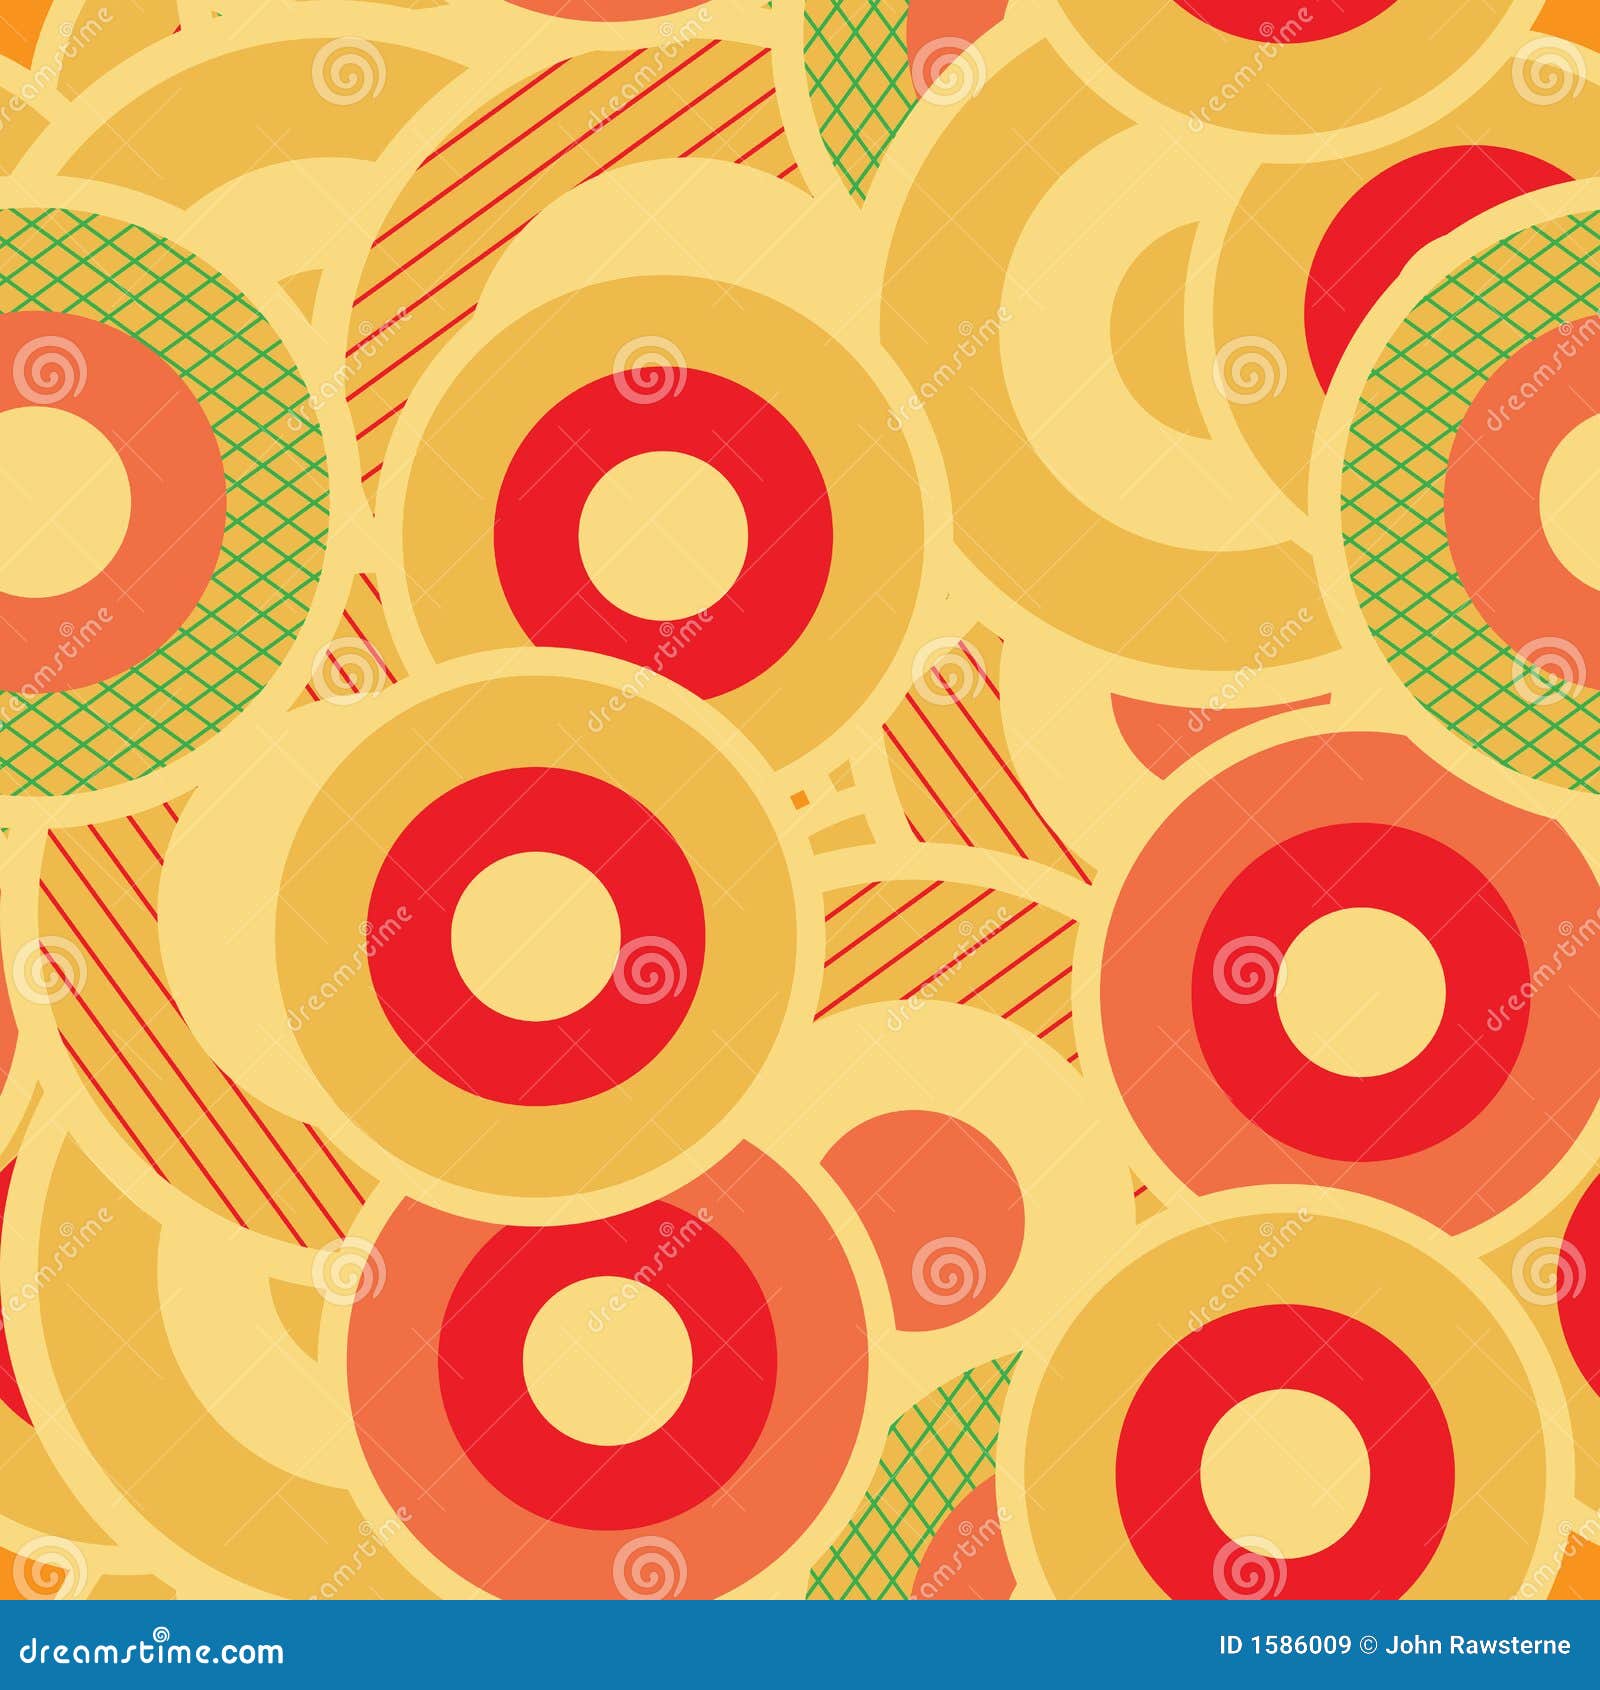 backgrounds tumblr retro Stock Retro Wallpaper Pattern Free Images Seamless Royalty